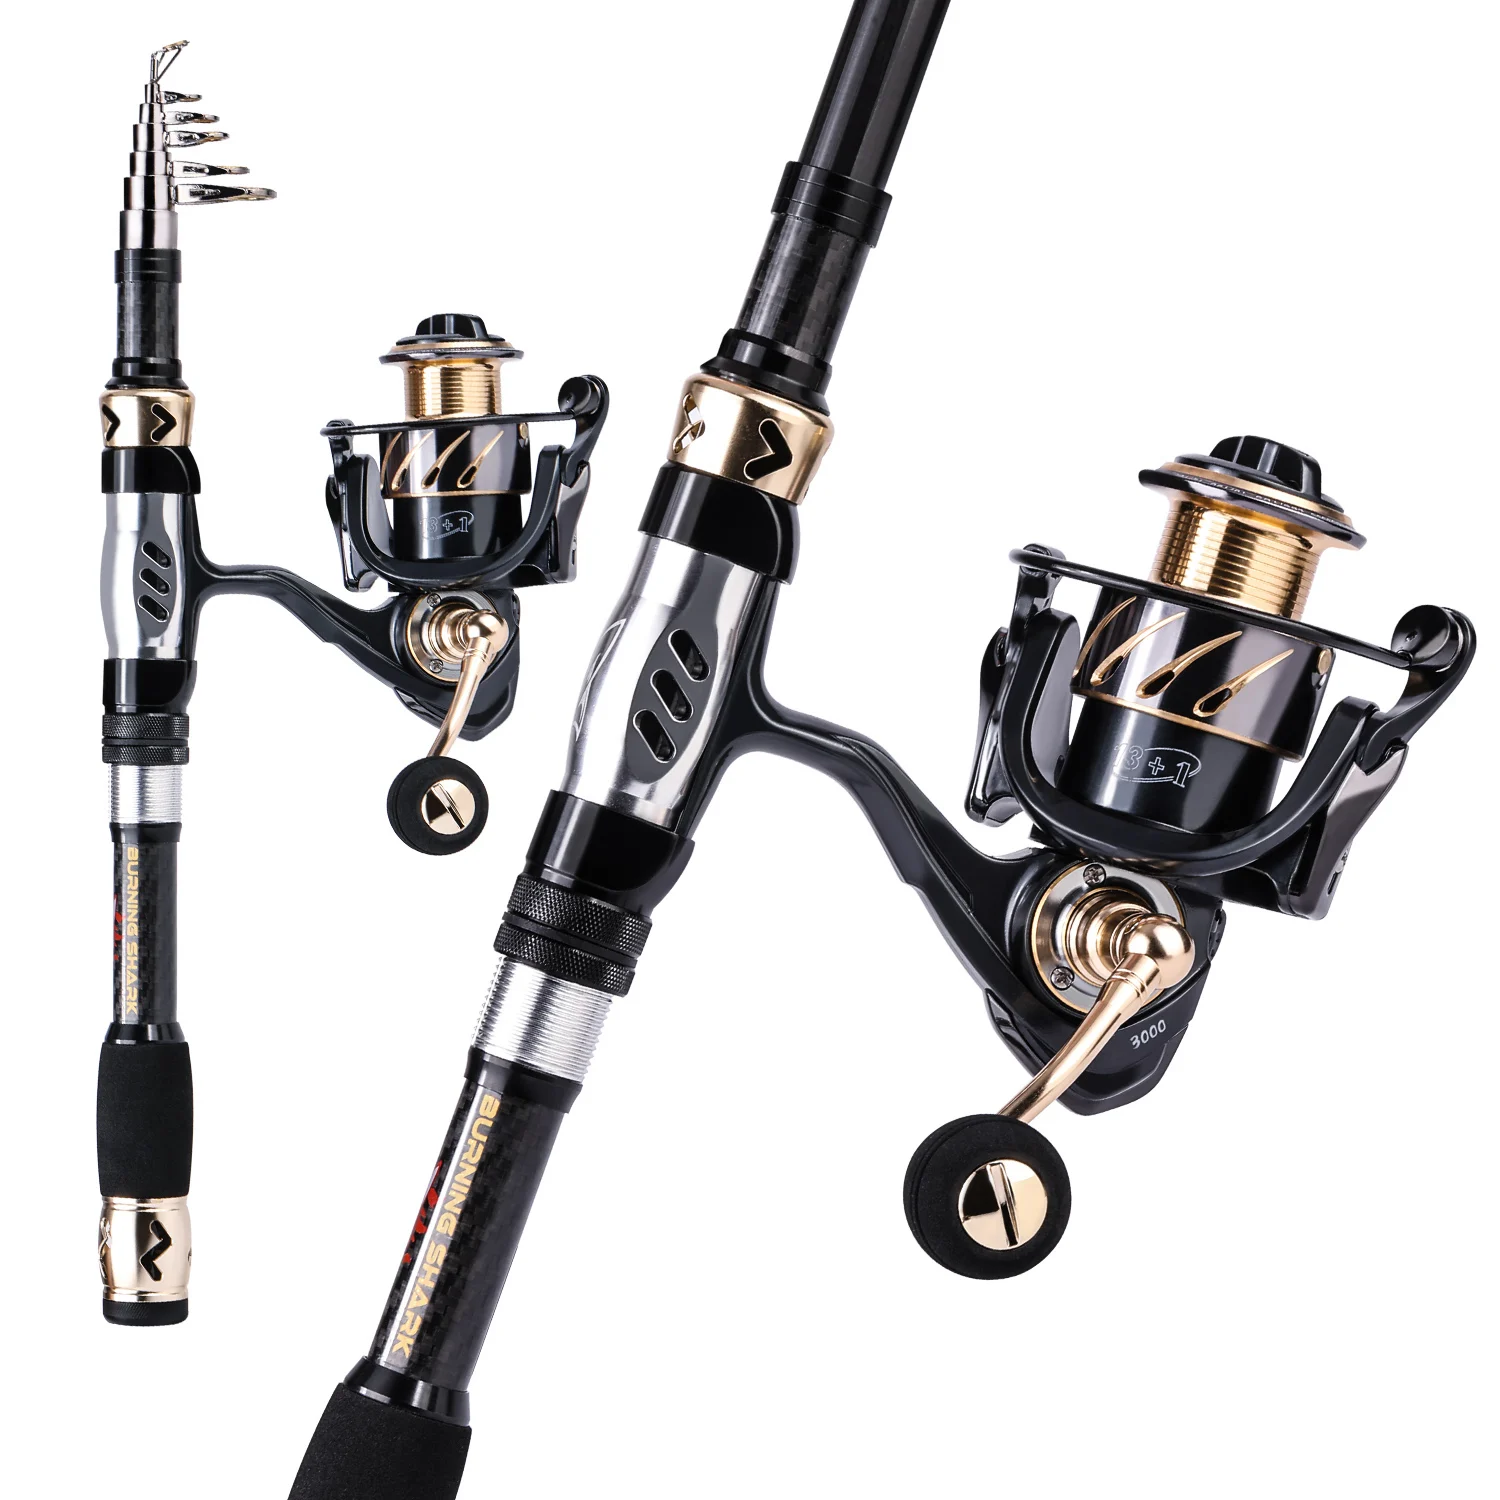 Sougayilang Fishing Rod And Reel Combos 1.8-3.0m High Carbon Fiber With Eva  Handle Telescopic Rod 13+1 Stainless Bearings Reel - Rod Combo - AliExpress